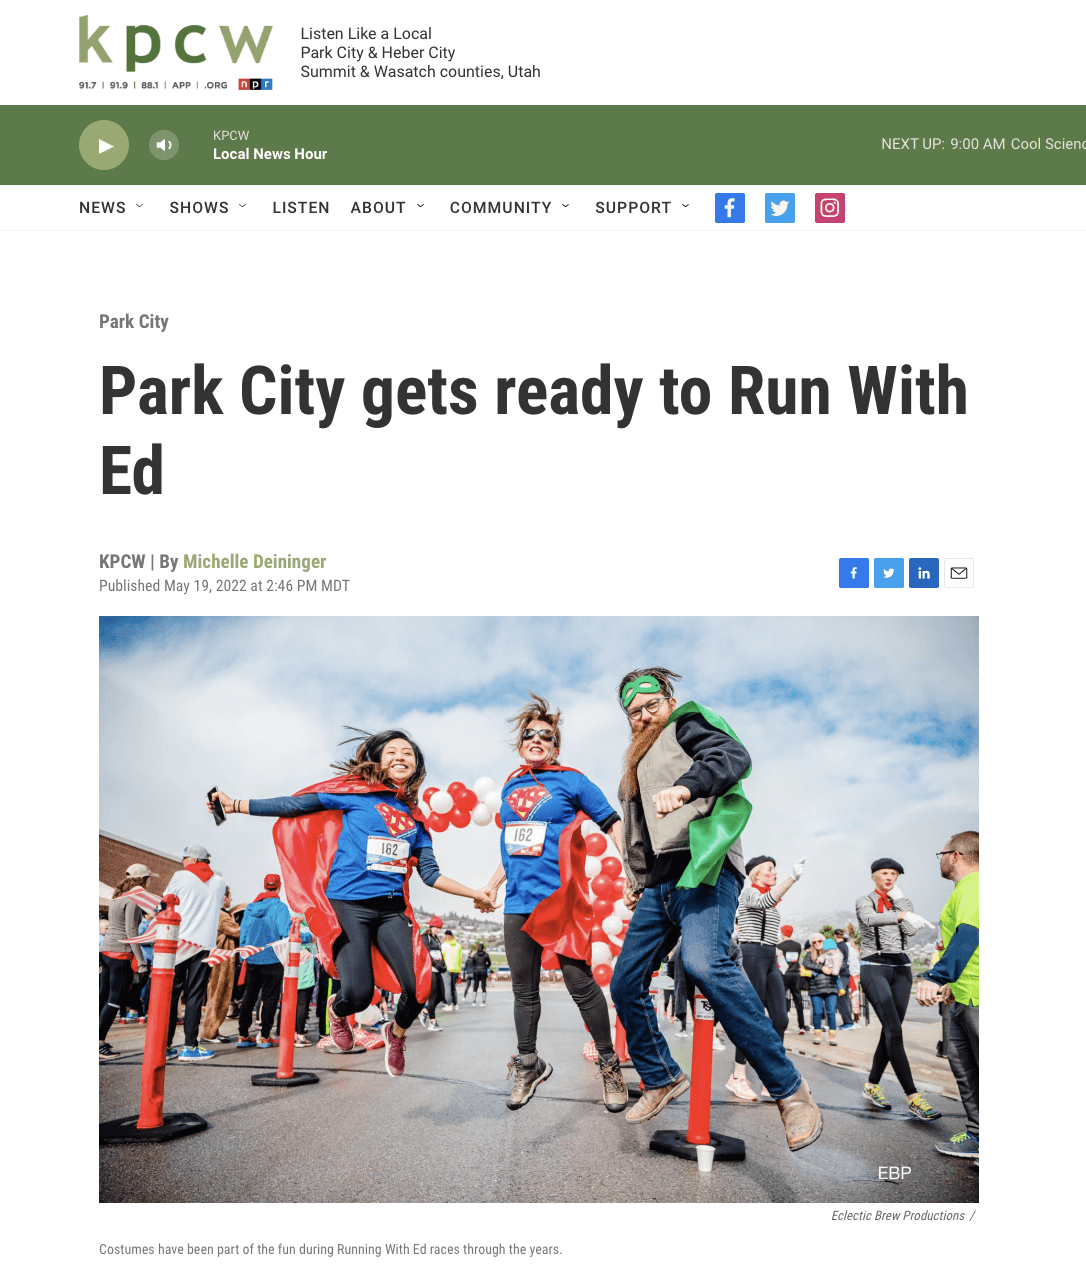 Park City Gets Ready to Run With Ed